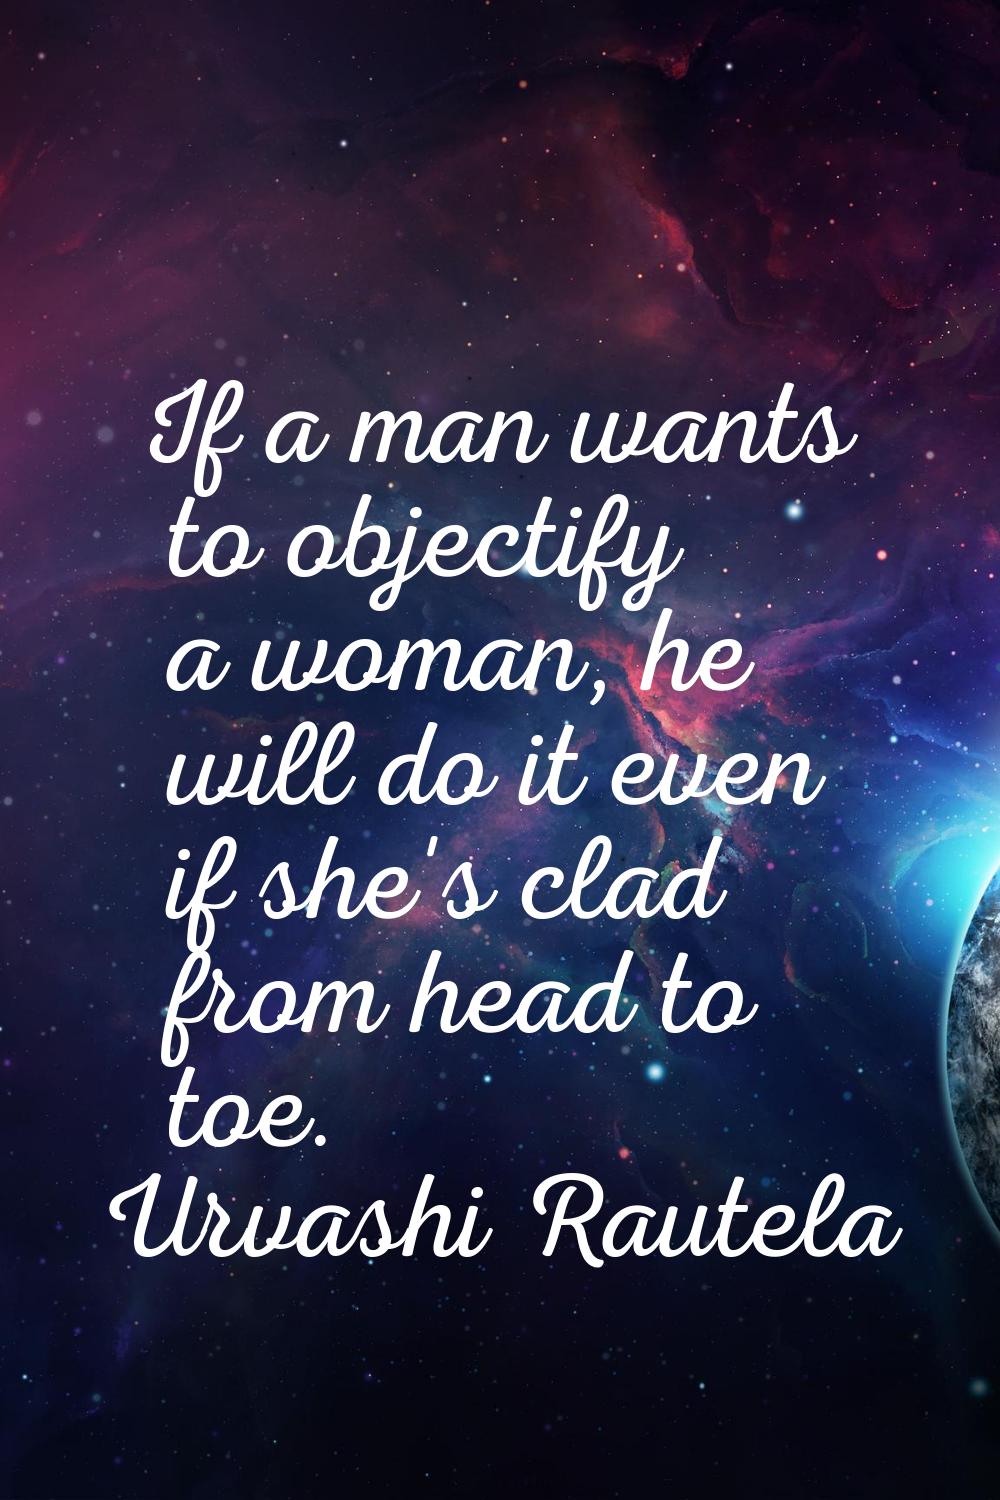 If a man wants to objectify a woman, he will do it even if she's clad from head to toe.